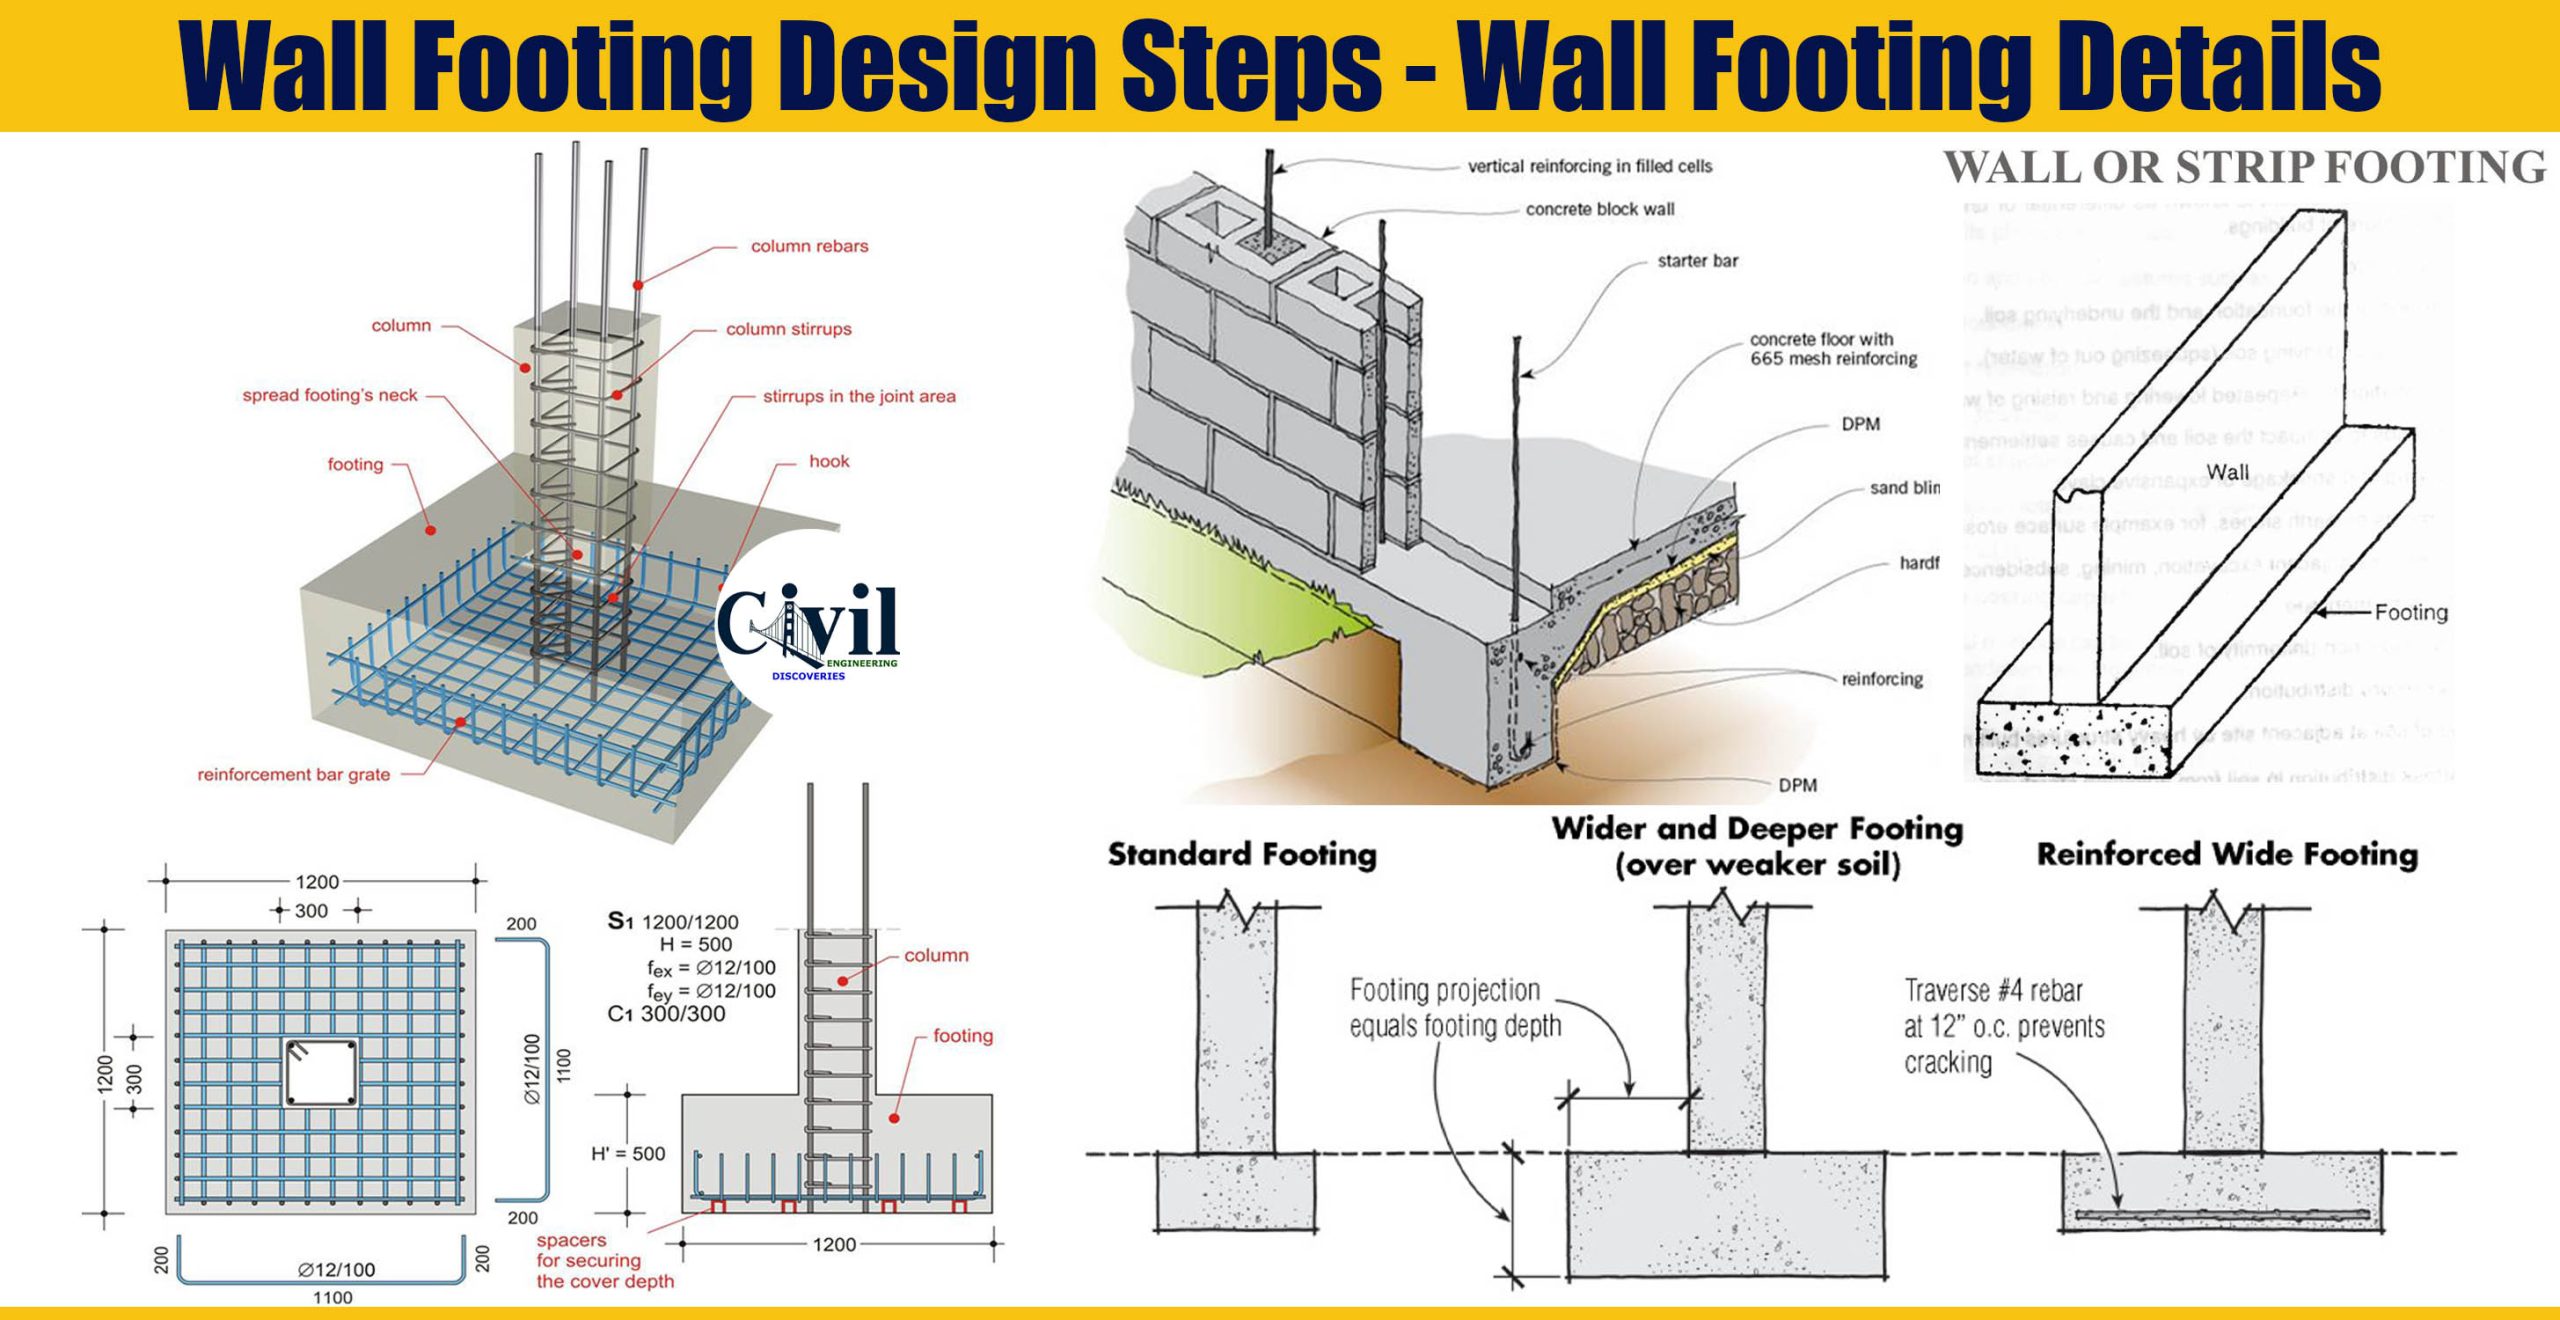 Wall Footing Design Steps Wall Footing Details Scaled 